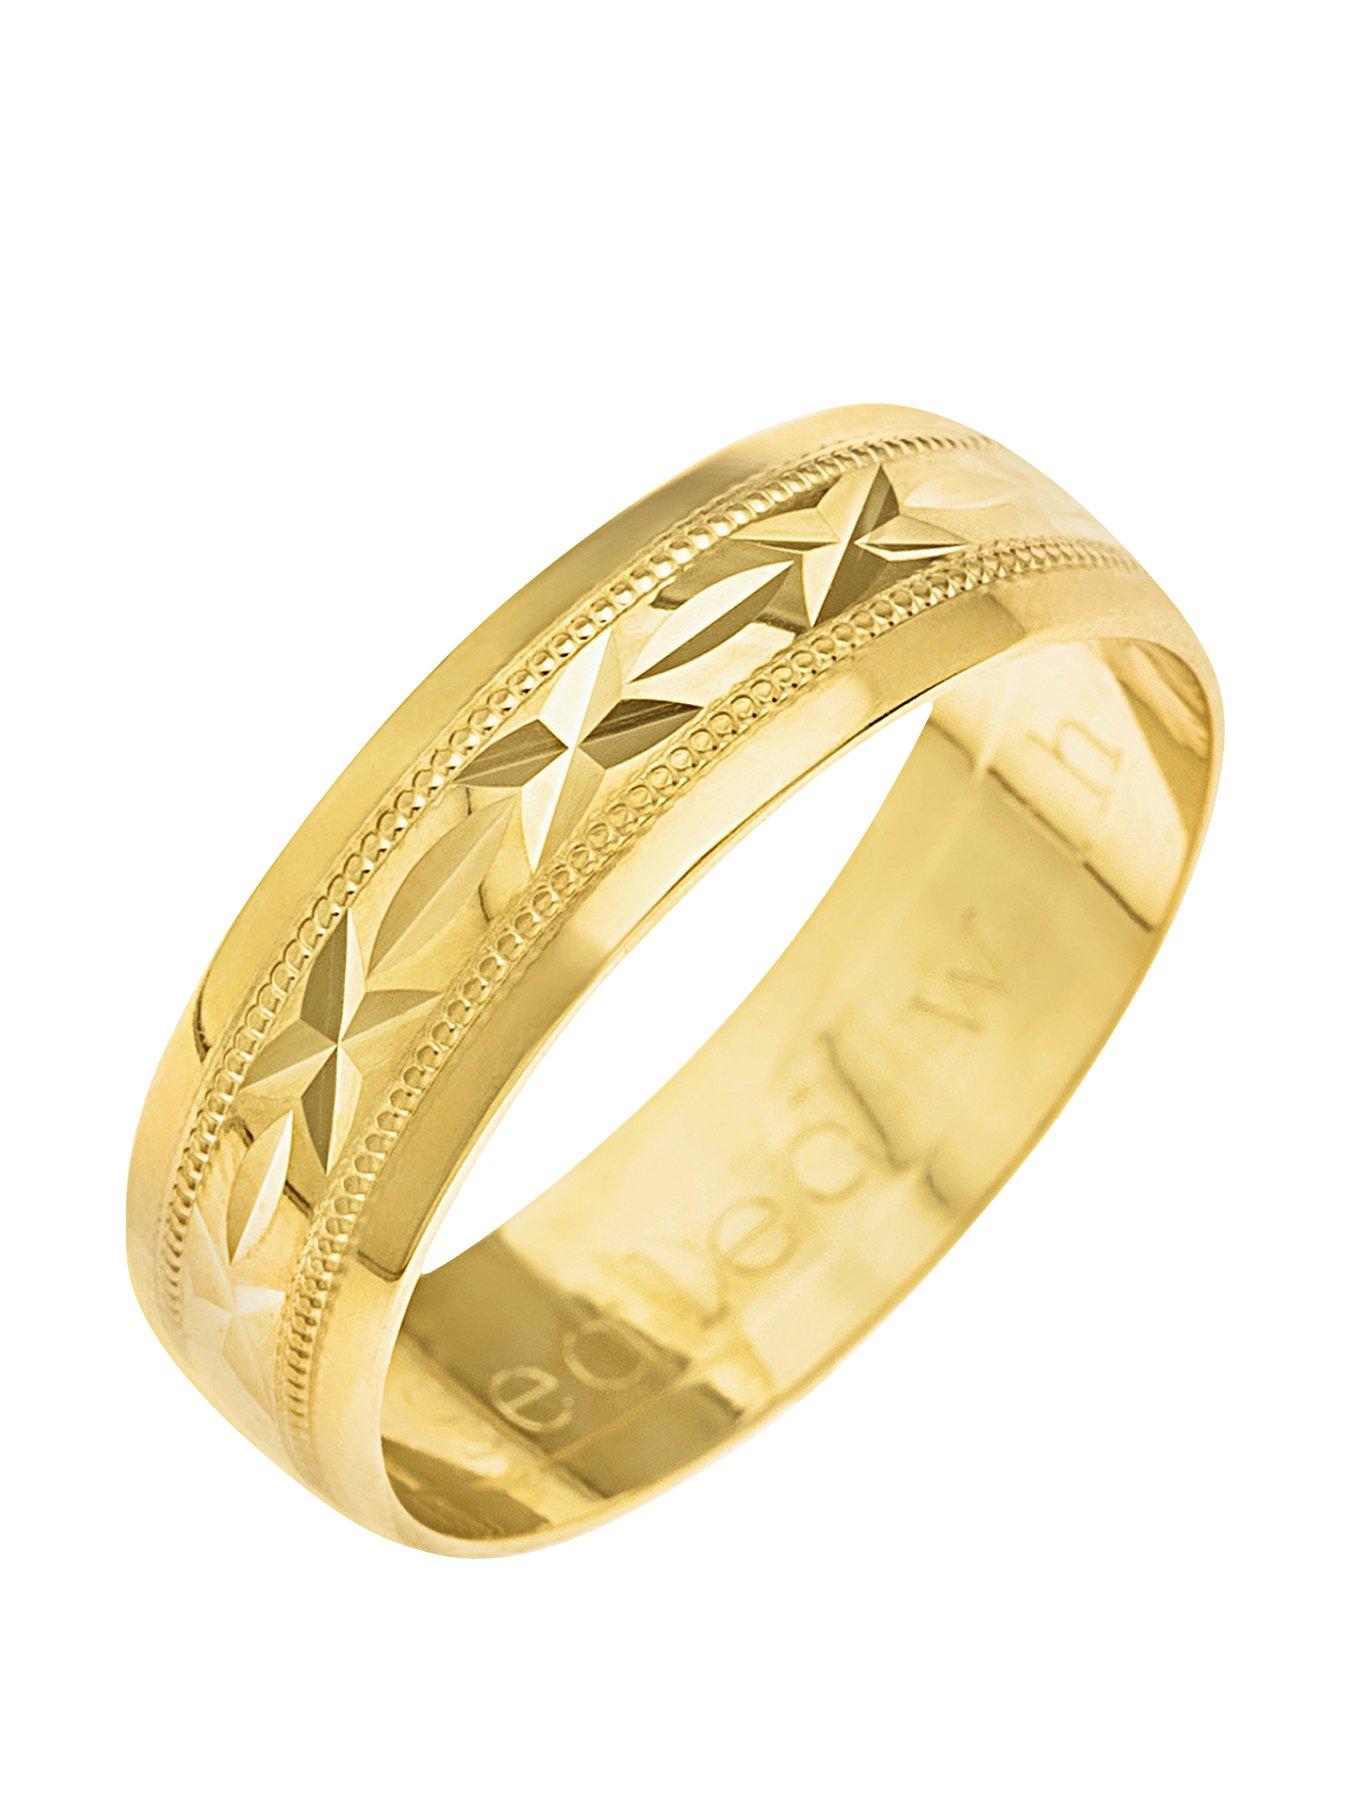 Men 9ct Yellow Gold Diamond Cut 6mm Wedding Band With Message 'Sealed With A Kiss'